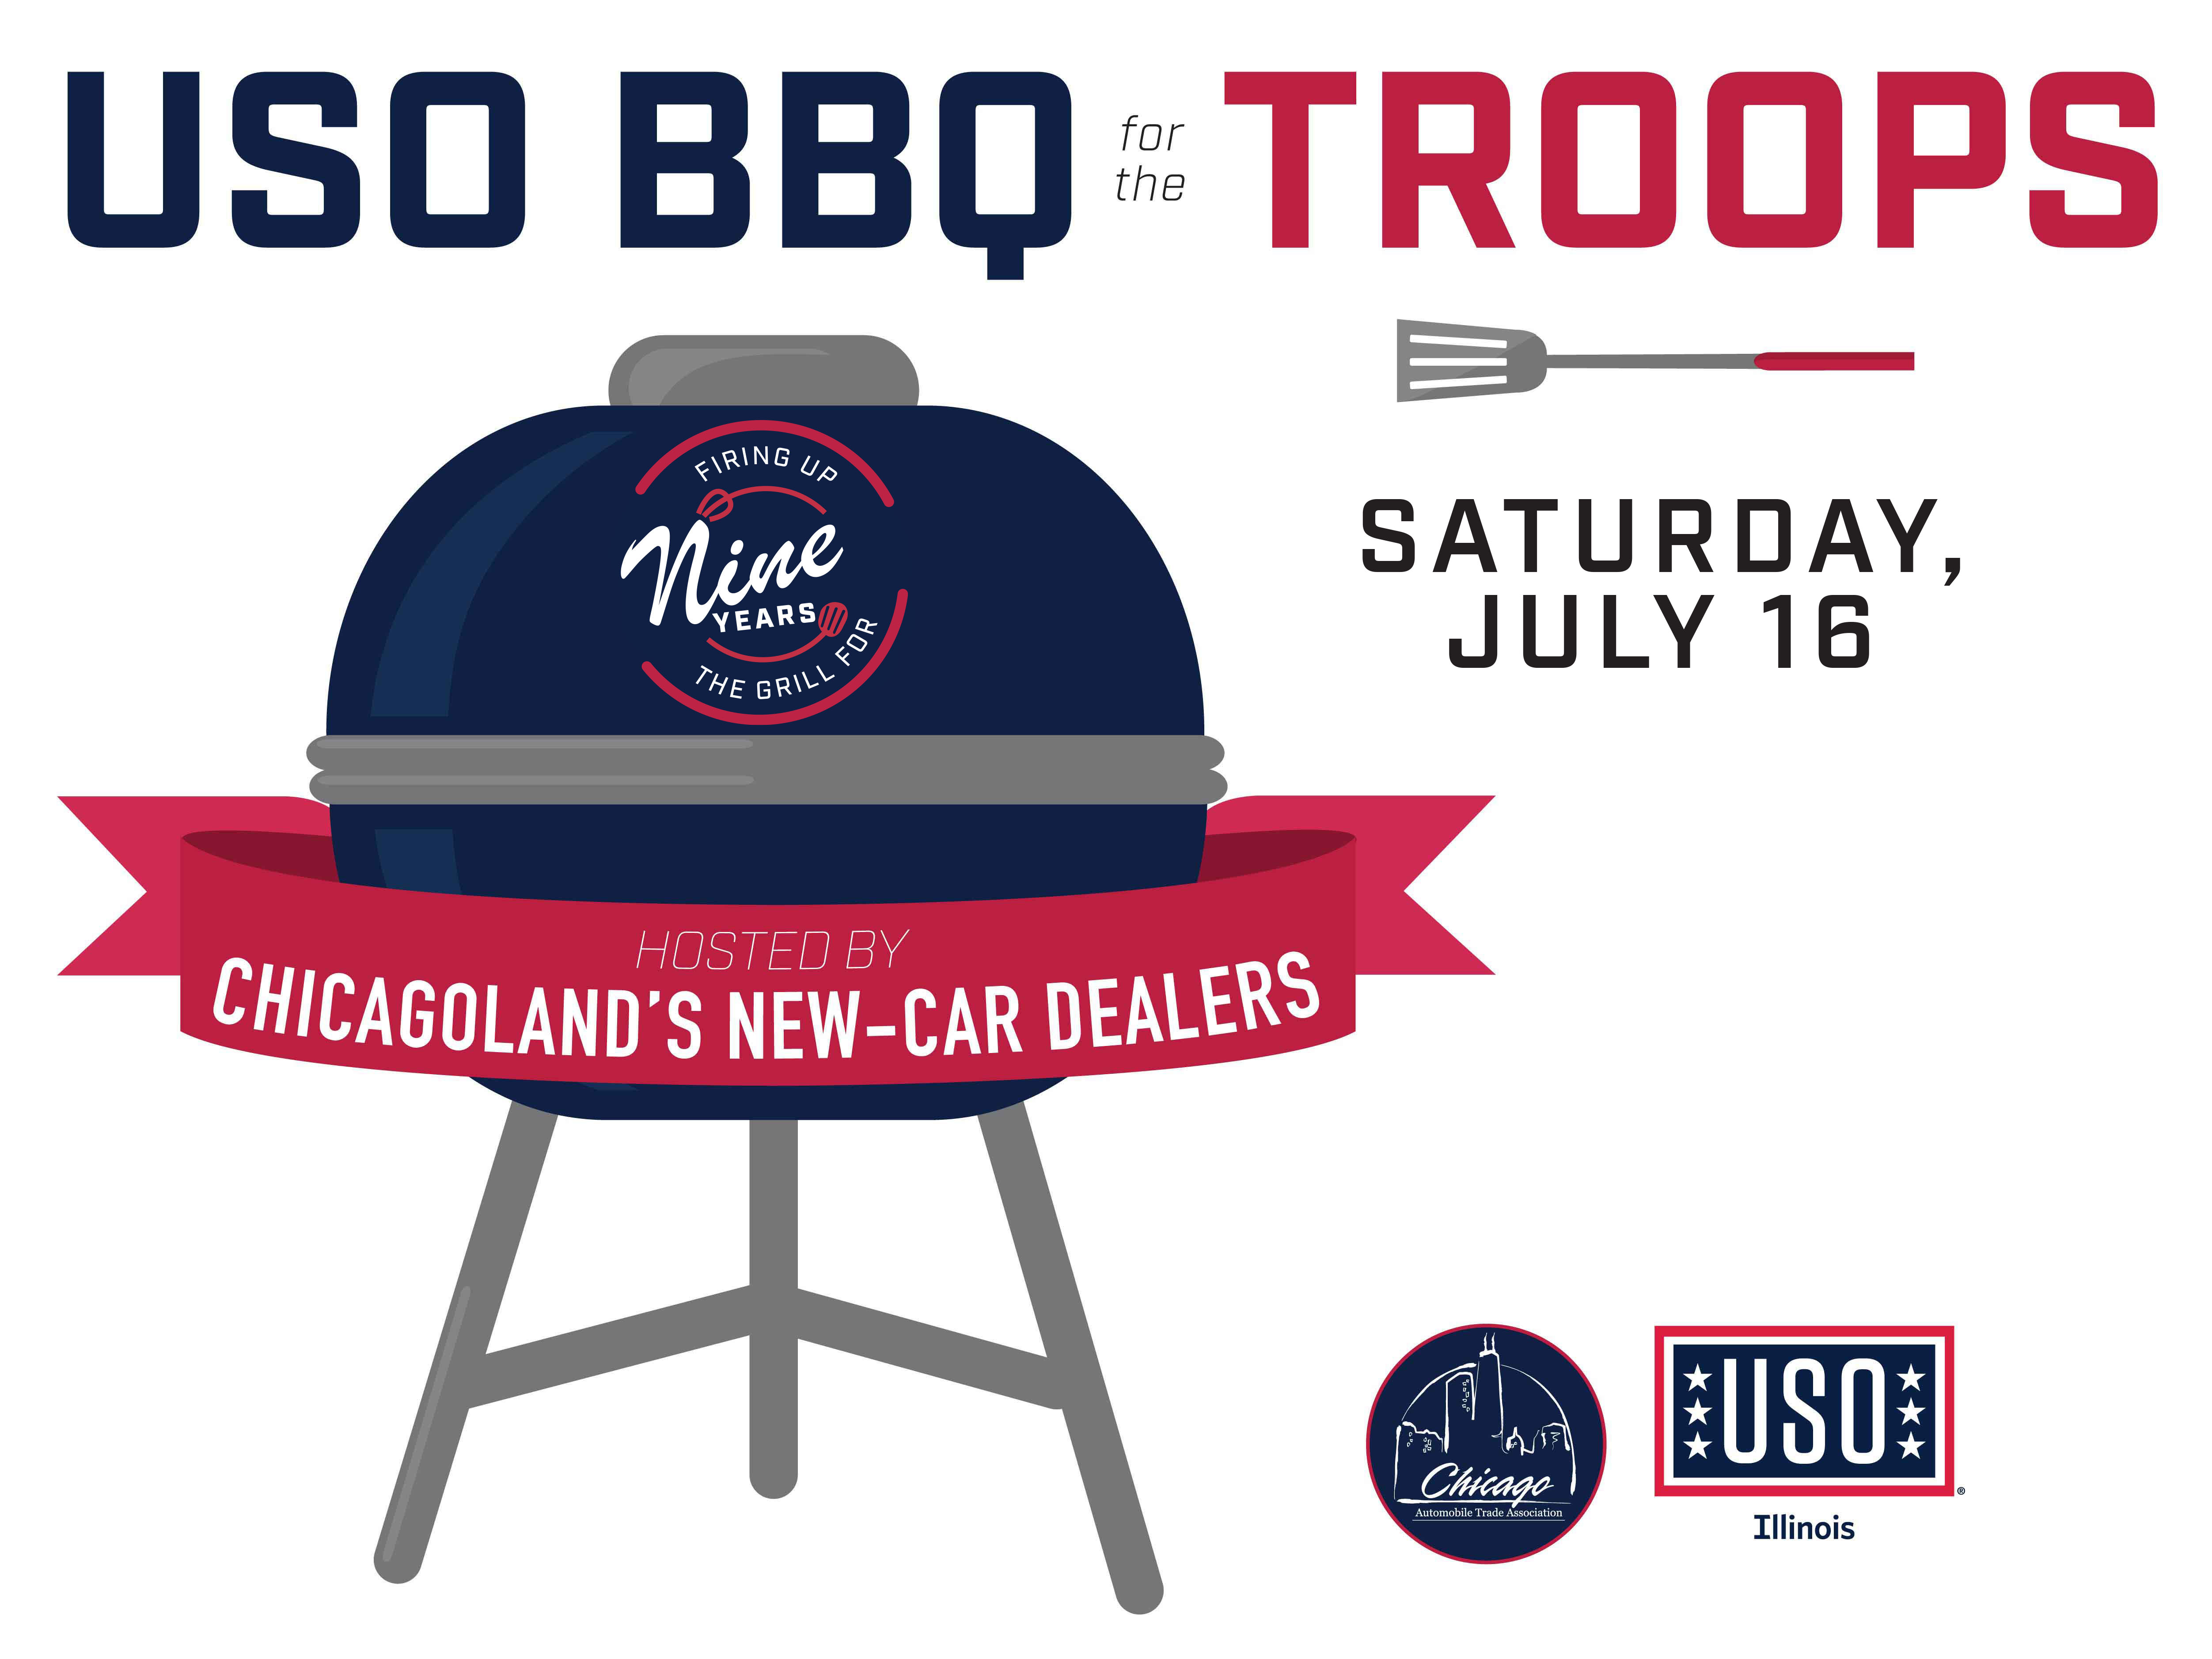 USO BBQ for the Troops, raising funds and awareness for the USO of